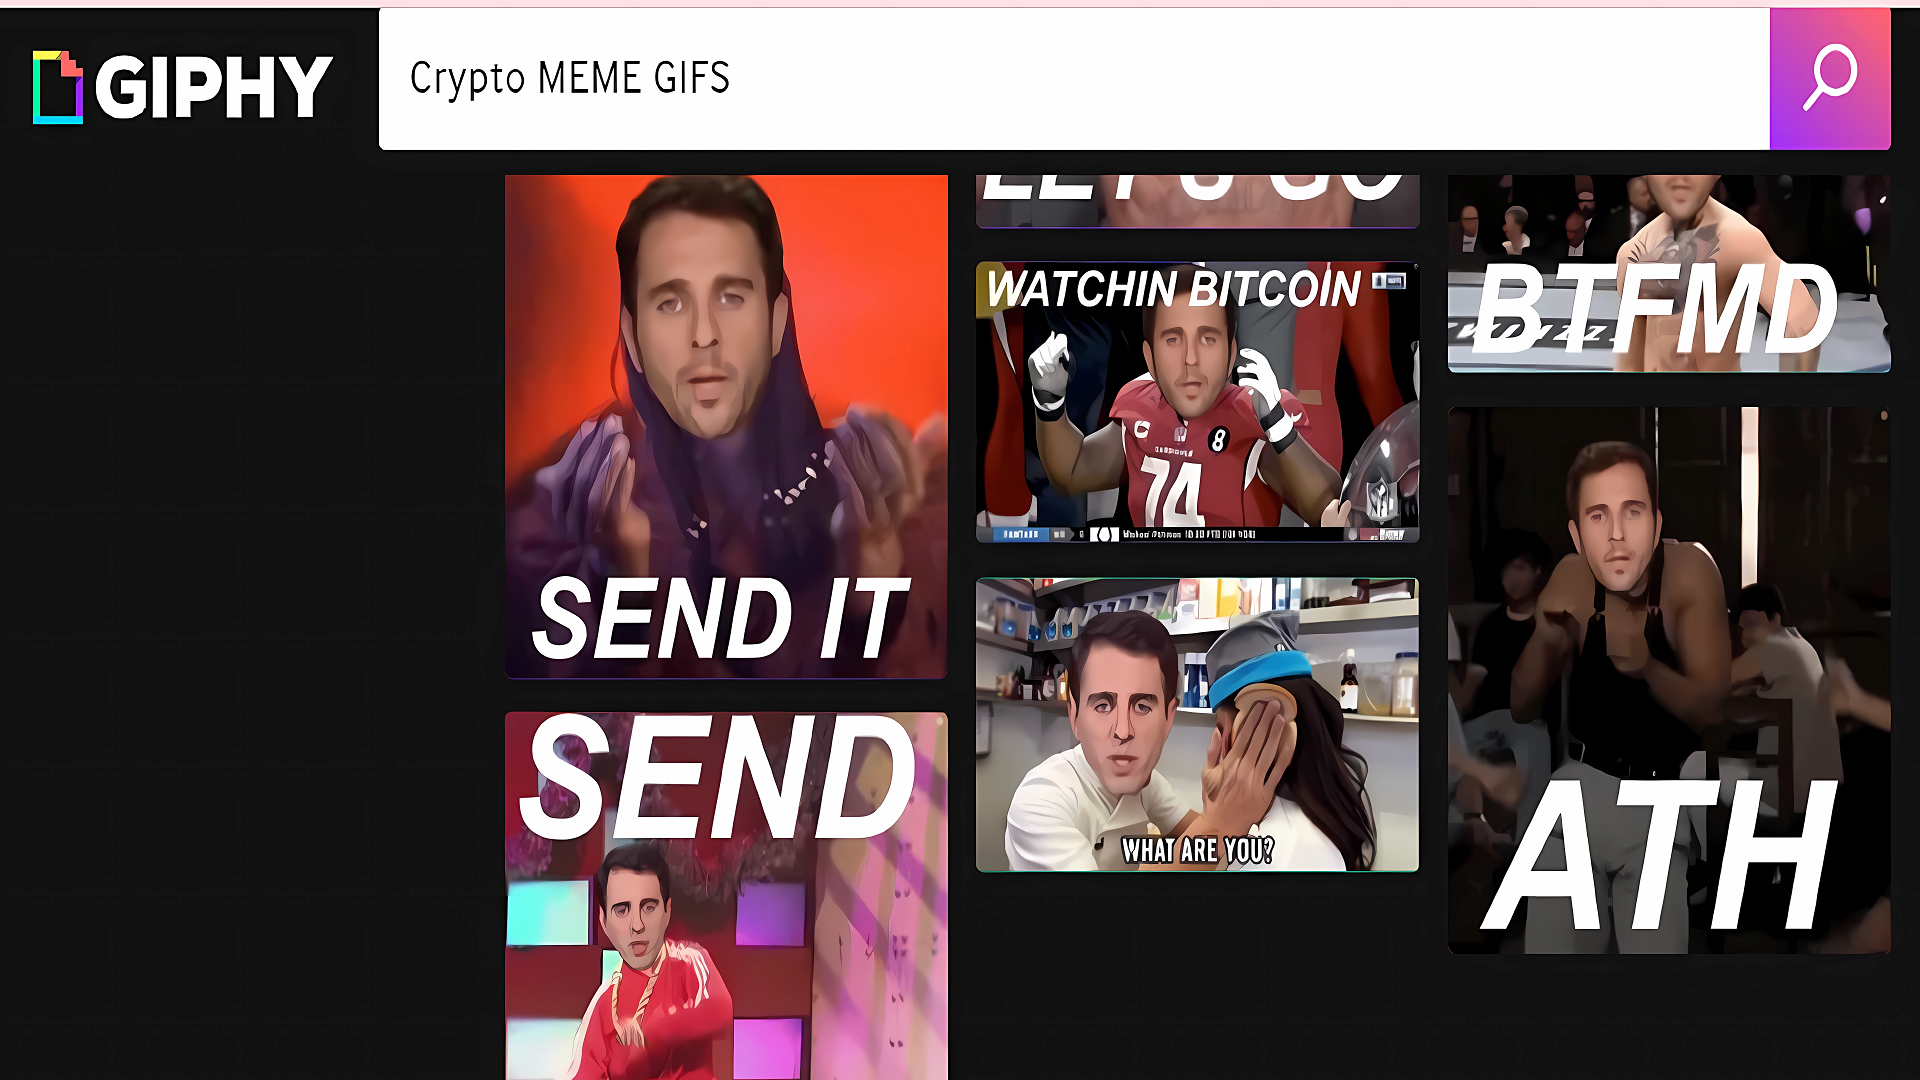 Meme Marketing: Navigating The Crypto Project With Humor